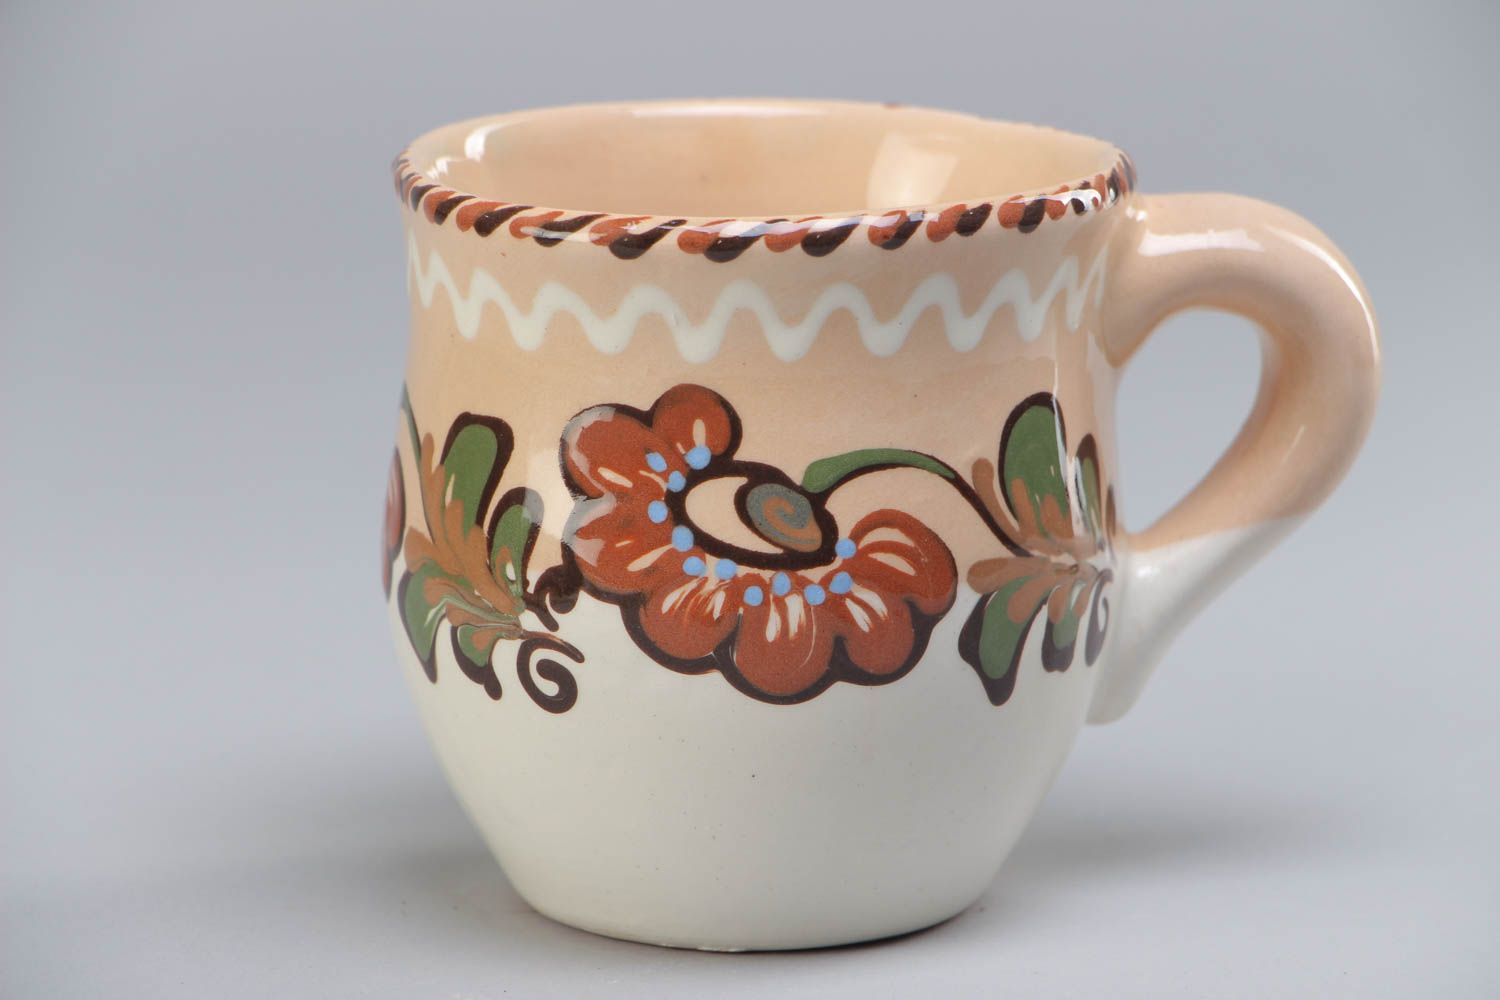 8,5 oz village-style clay floral glazed coffee cup 0,82 lb photo 2